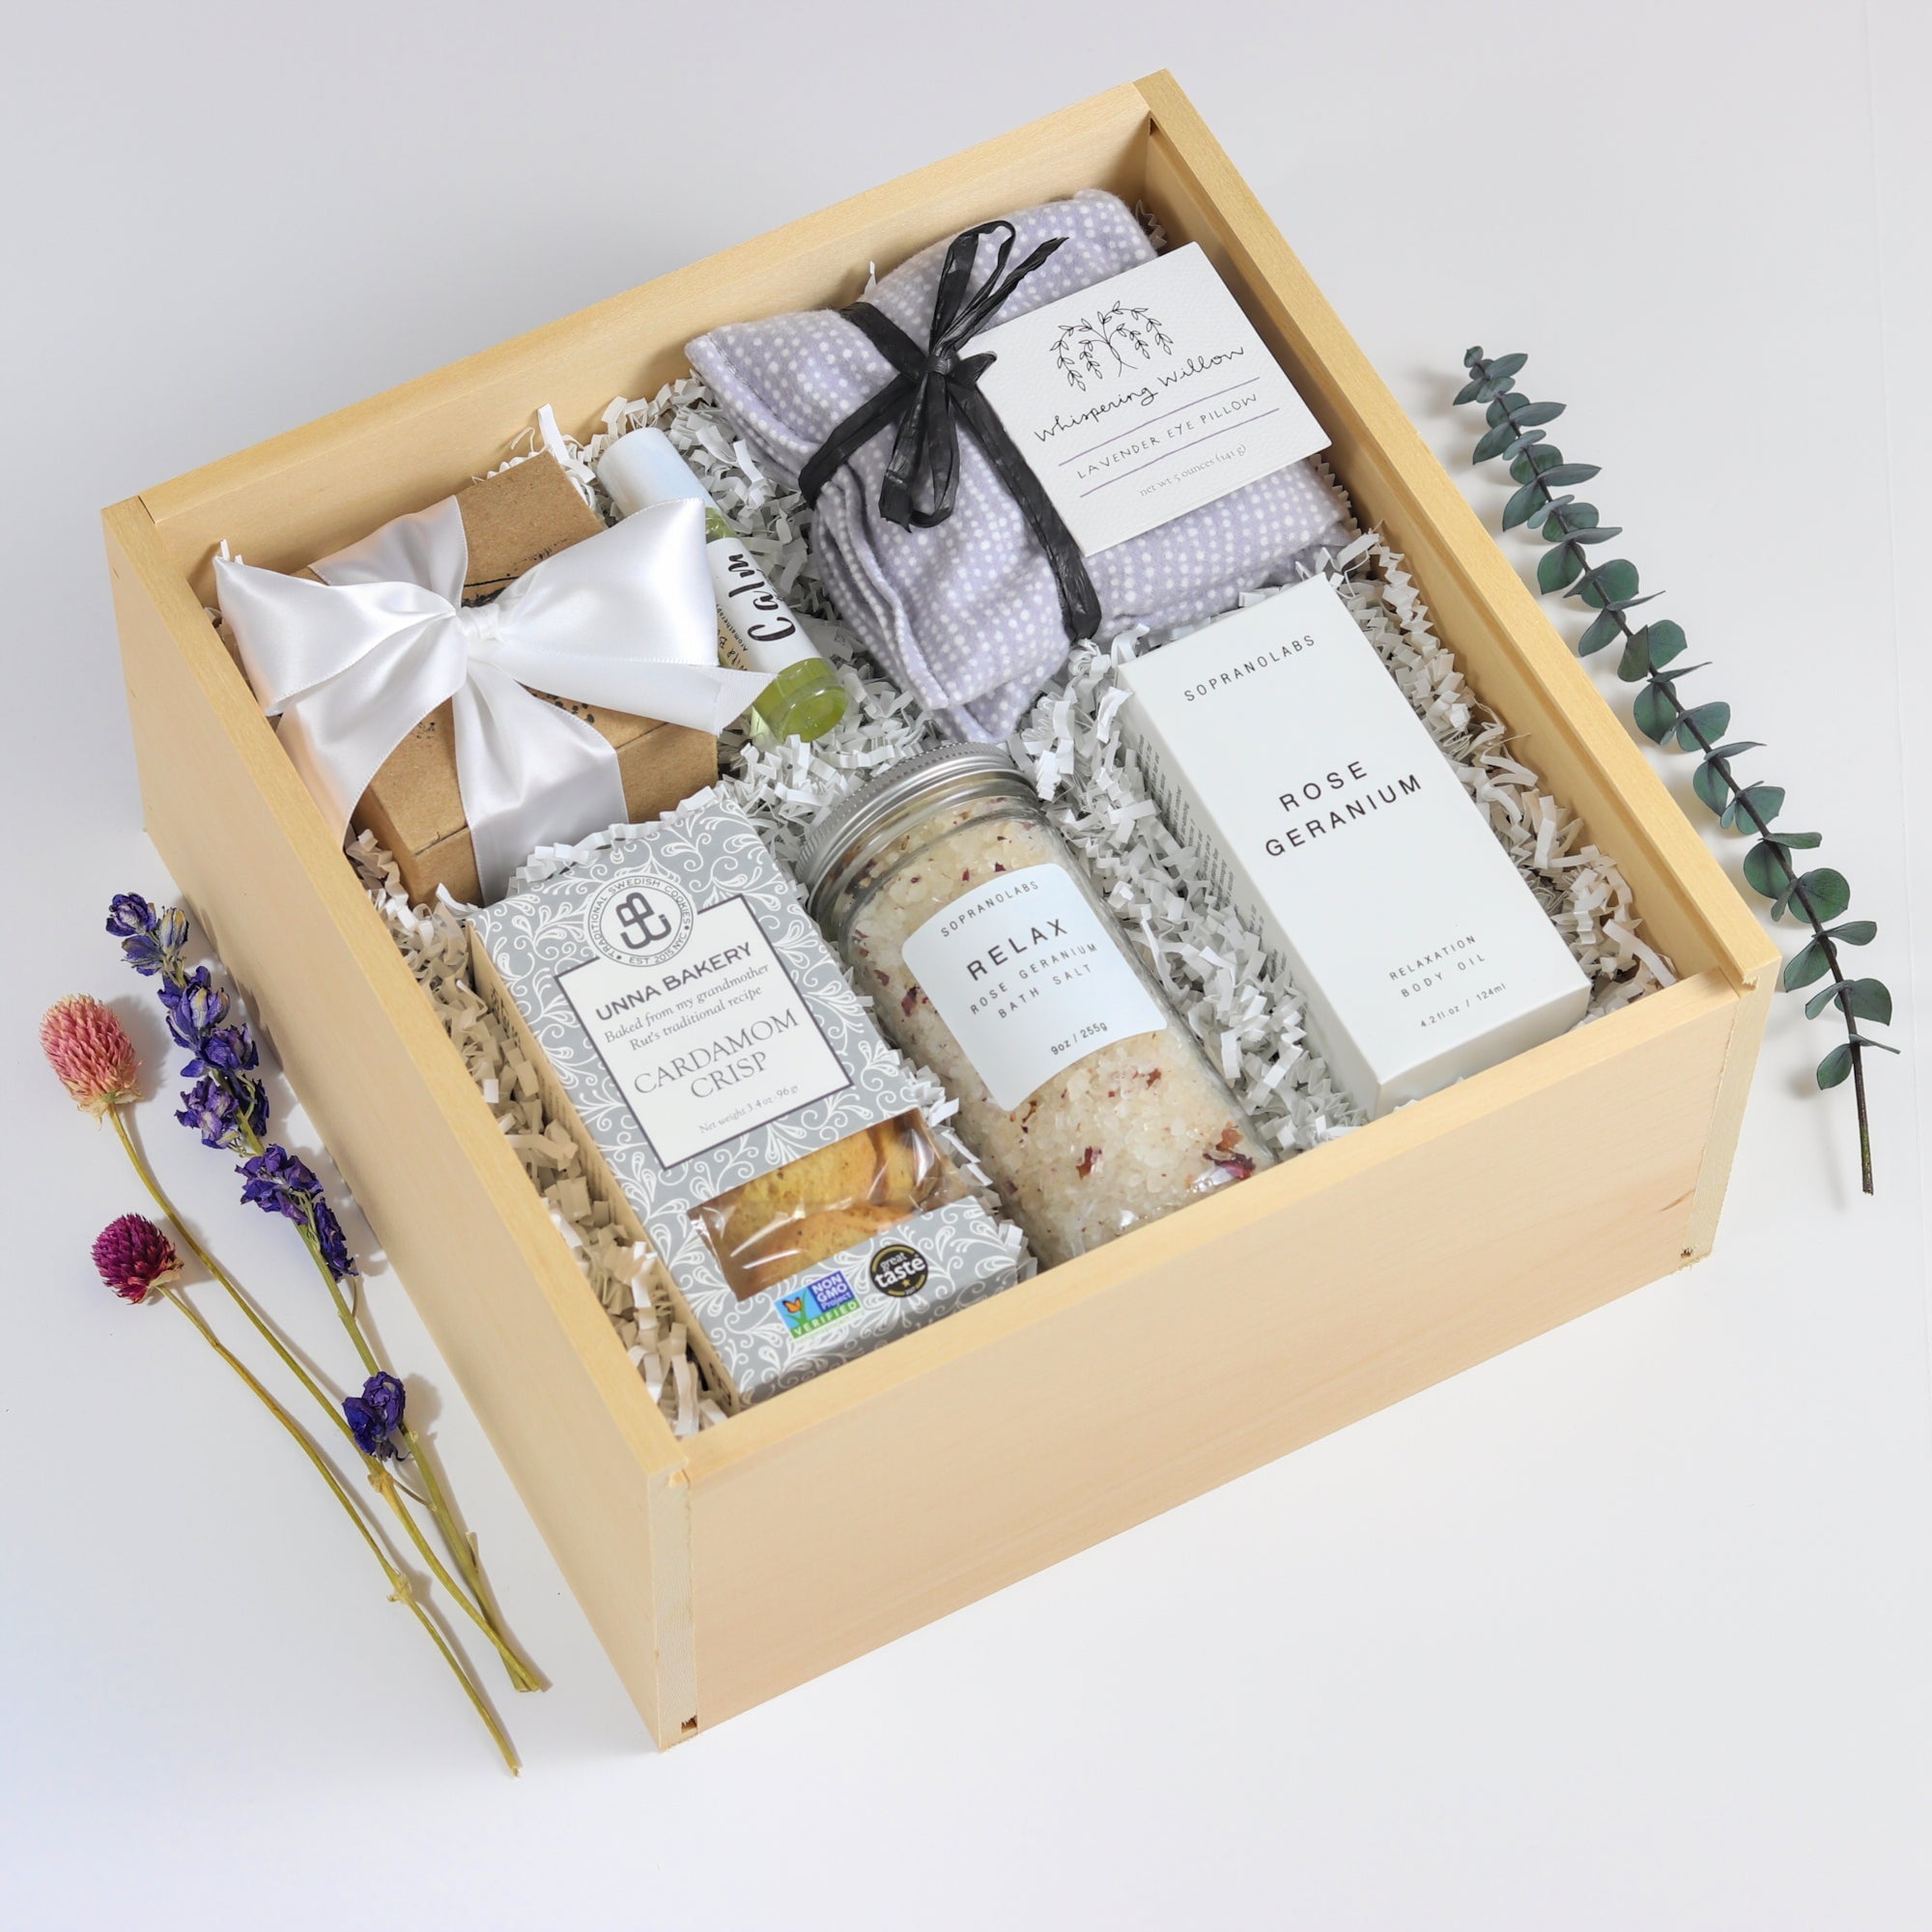 Relaxation Gift Set The Artisan Gift Boxes 